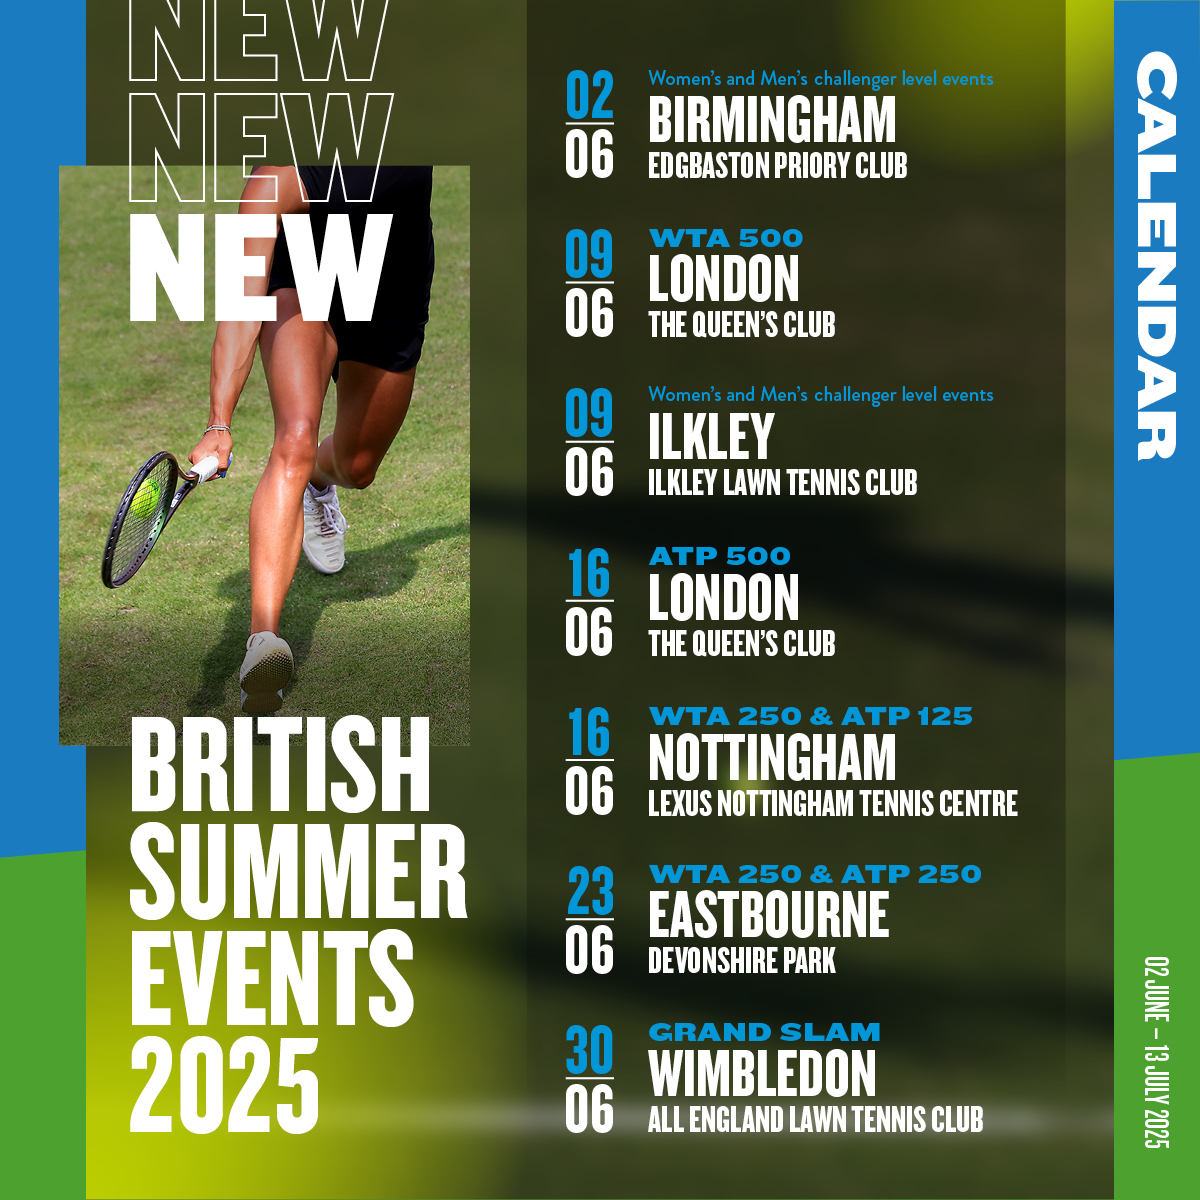 A new grass court calendar is coming in 2025 🎾 @WTA event returns to London for 1st time in 50 years 🎾 Birmingham event to start the grass court season 🎾 Men’s & Women’s events at every venue Find out more at shorturl.at/eiIL1